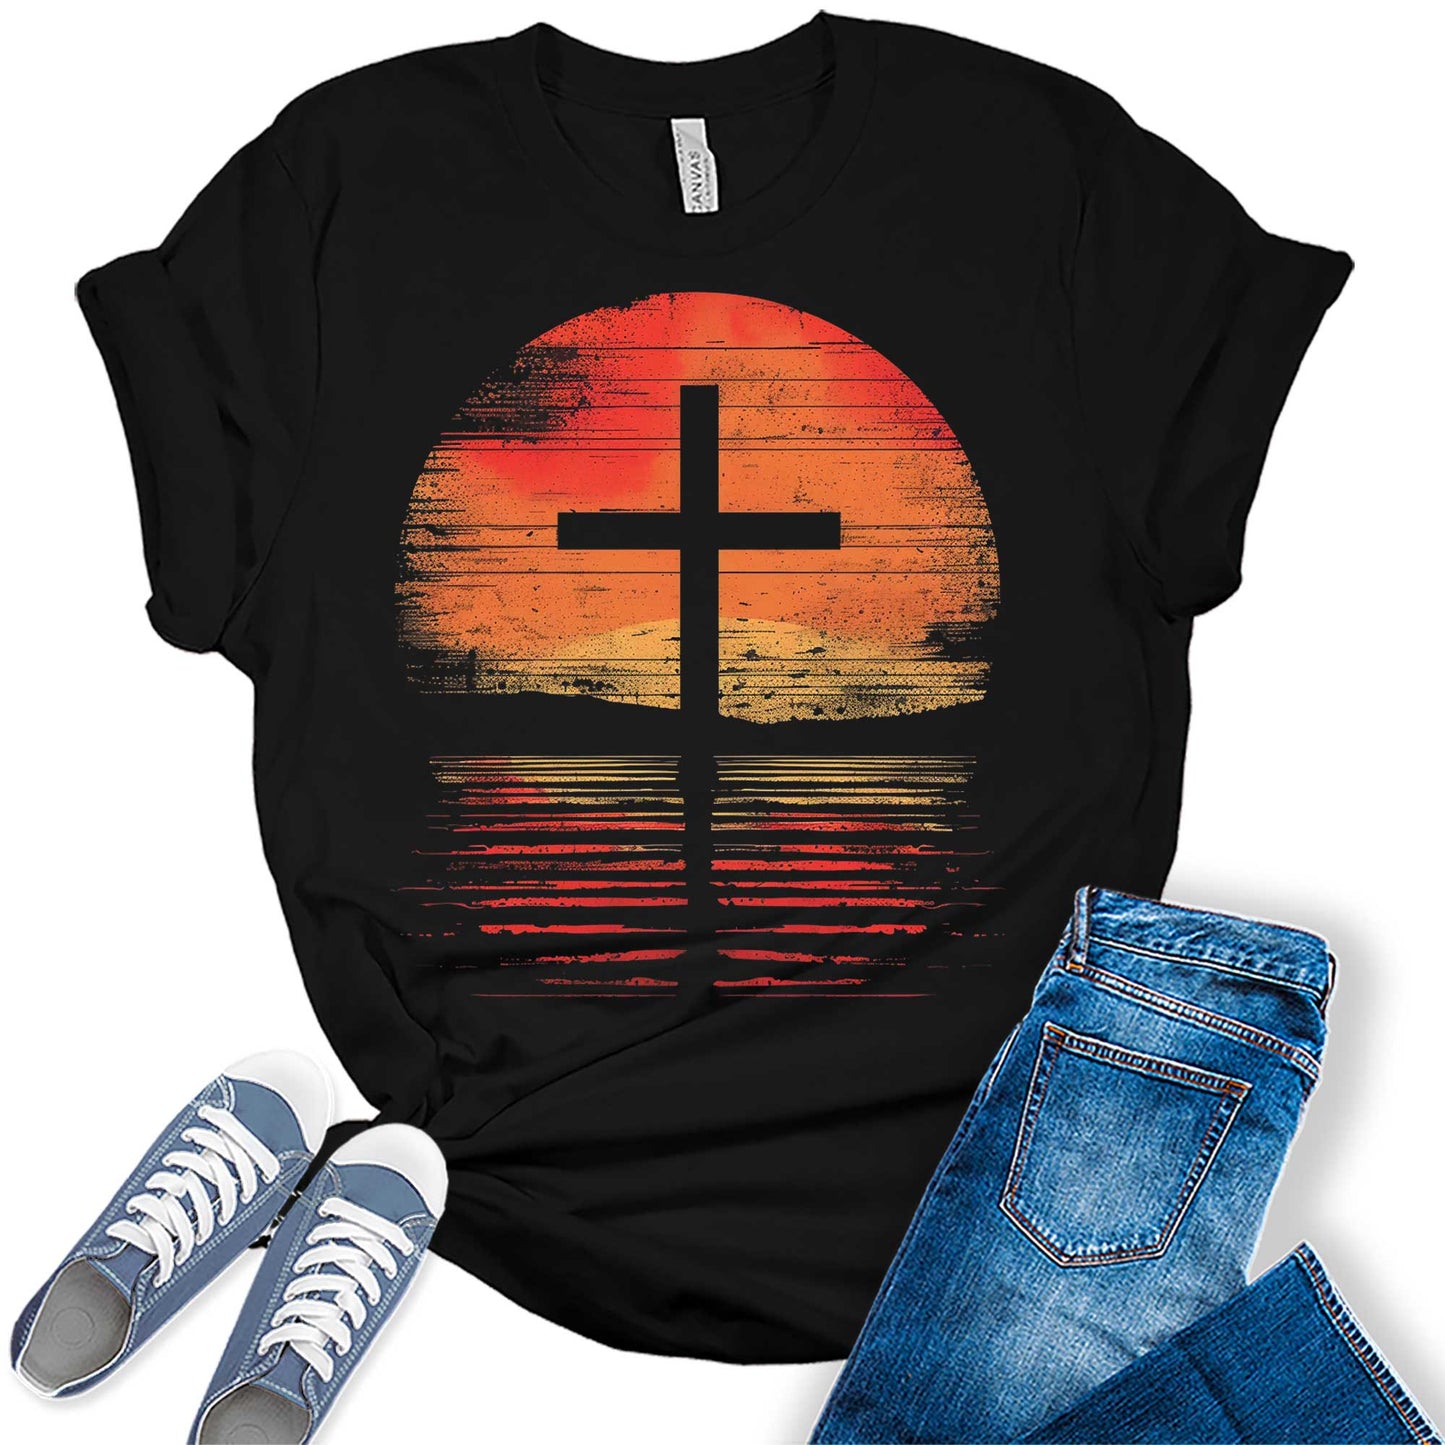 Cross Shirt Christian T Shirts for Women Trendy Summer Graphic Tees Casual Short Sleeve Tops